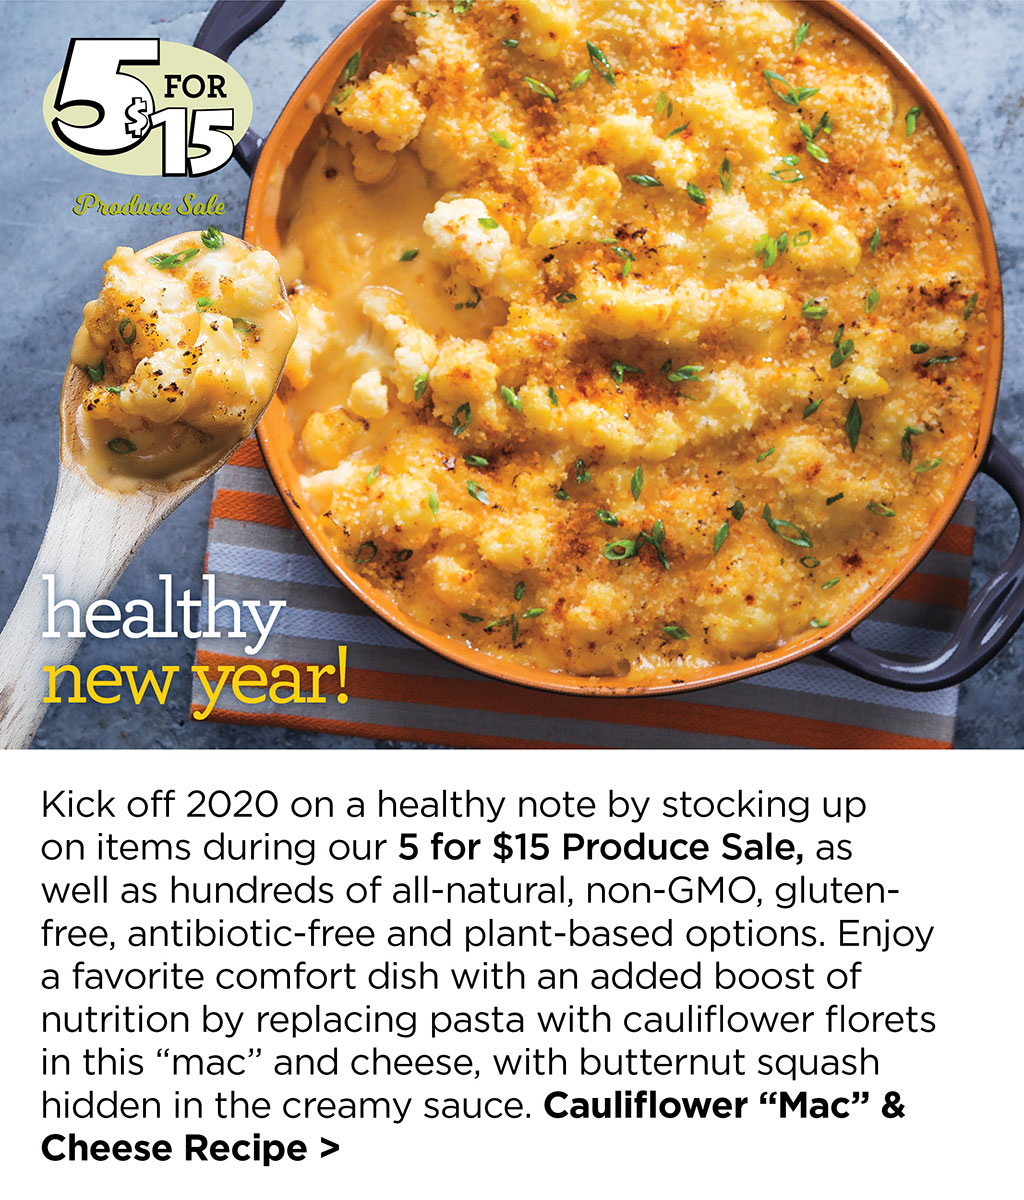 healthy new year! Kick off 2020 on a healthy note by stocking up on items during our 5 for $15 Produce Sale, as well as hundreds of all-natural, non-GMO, gluten-free, antibiotic-free and plant-based options. Enjoy a favorite comfort dish with an added boost of nutrition by replacing pasta with cauliflower florets in this mac and cheese, with butternut squash hidden in the creamy sauce. Cauliflower Mac & Cheese Recipe >